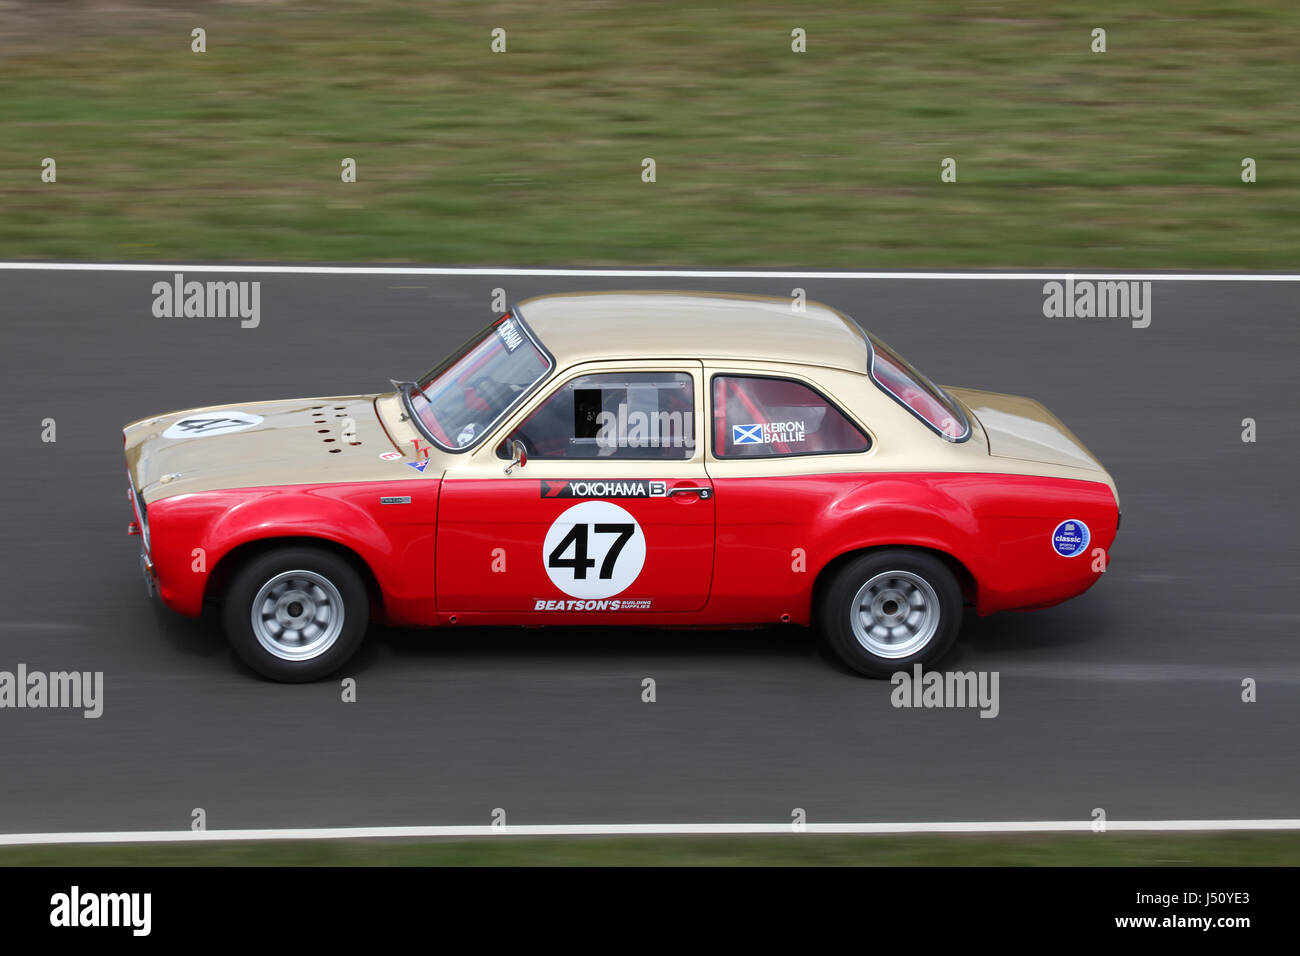 A mk1 ford escort competing at Knockhill race circuit in Fife, Scotland Stock Photo